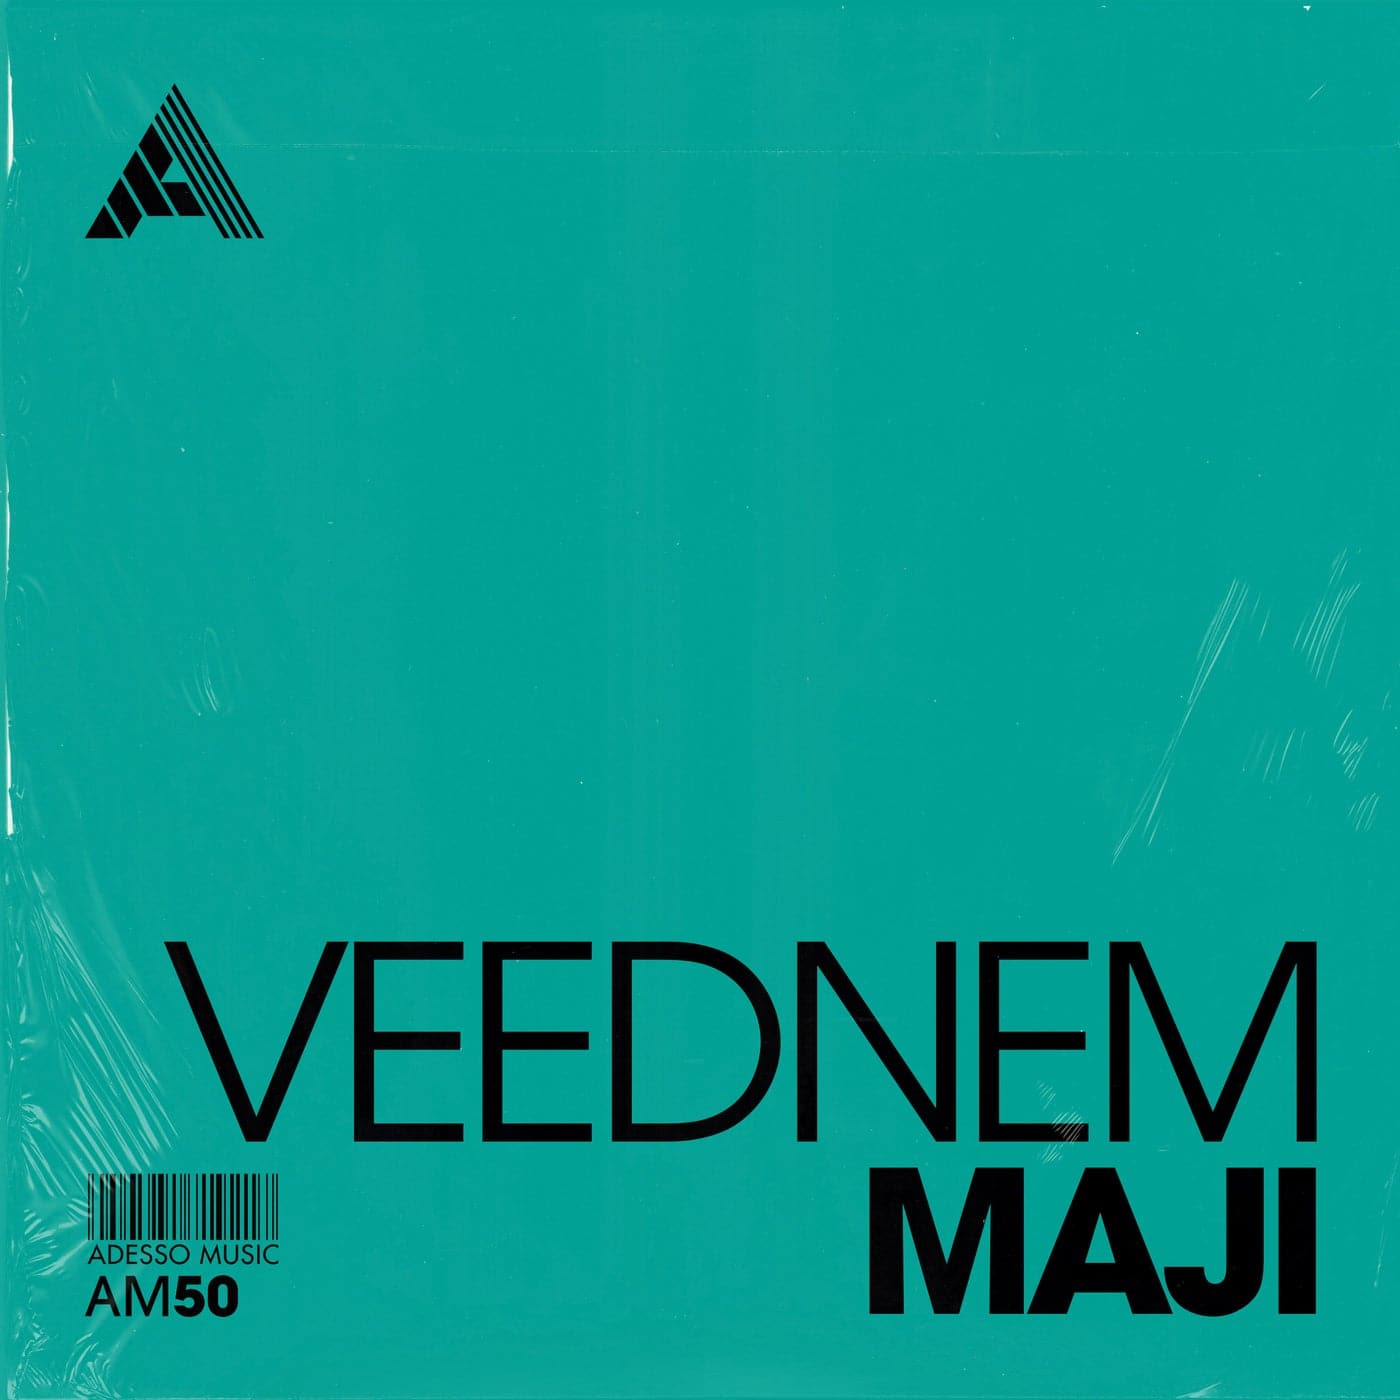 image cover: Veednem - Maji - Extended Mix on Adesso Music